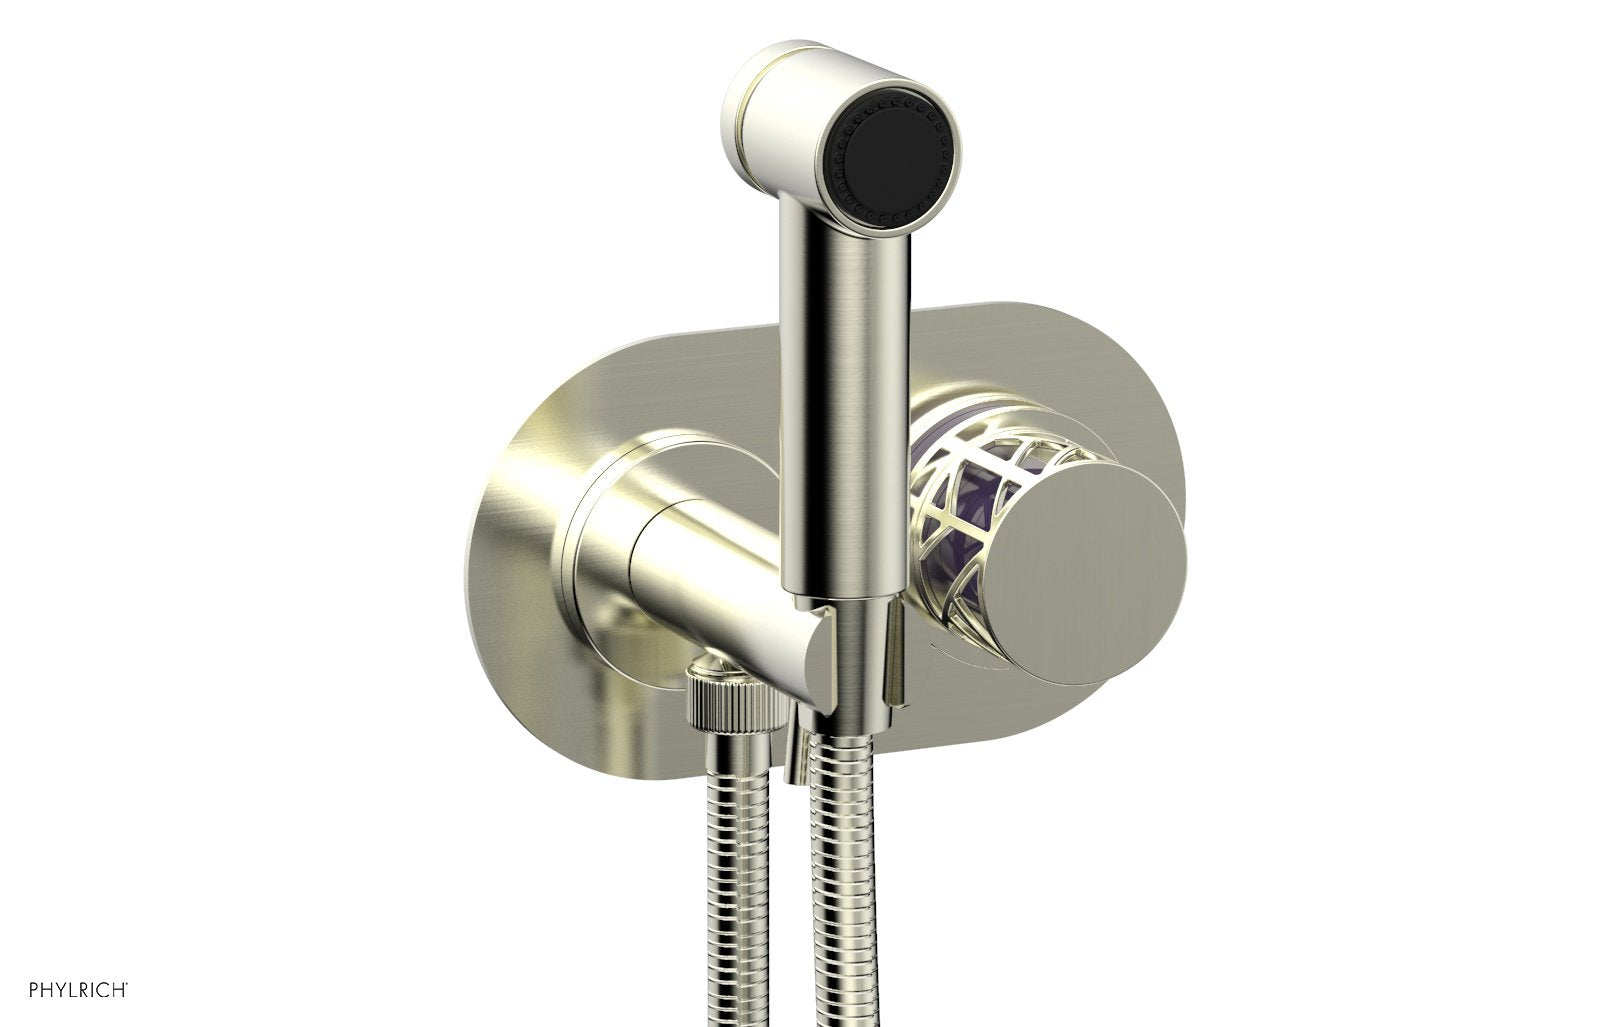 Phylrich JOLIE Wall Mounted Bidet, Round Handle with "Purple" Accents